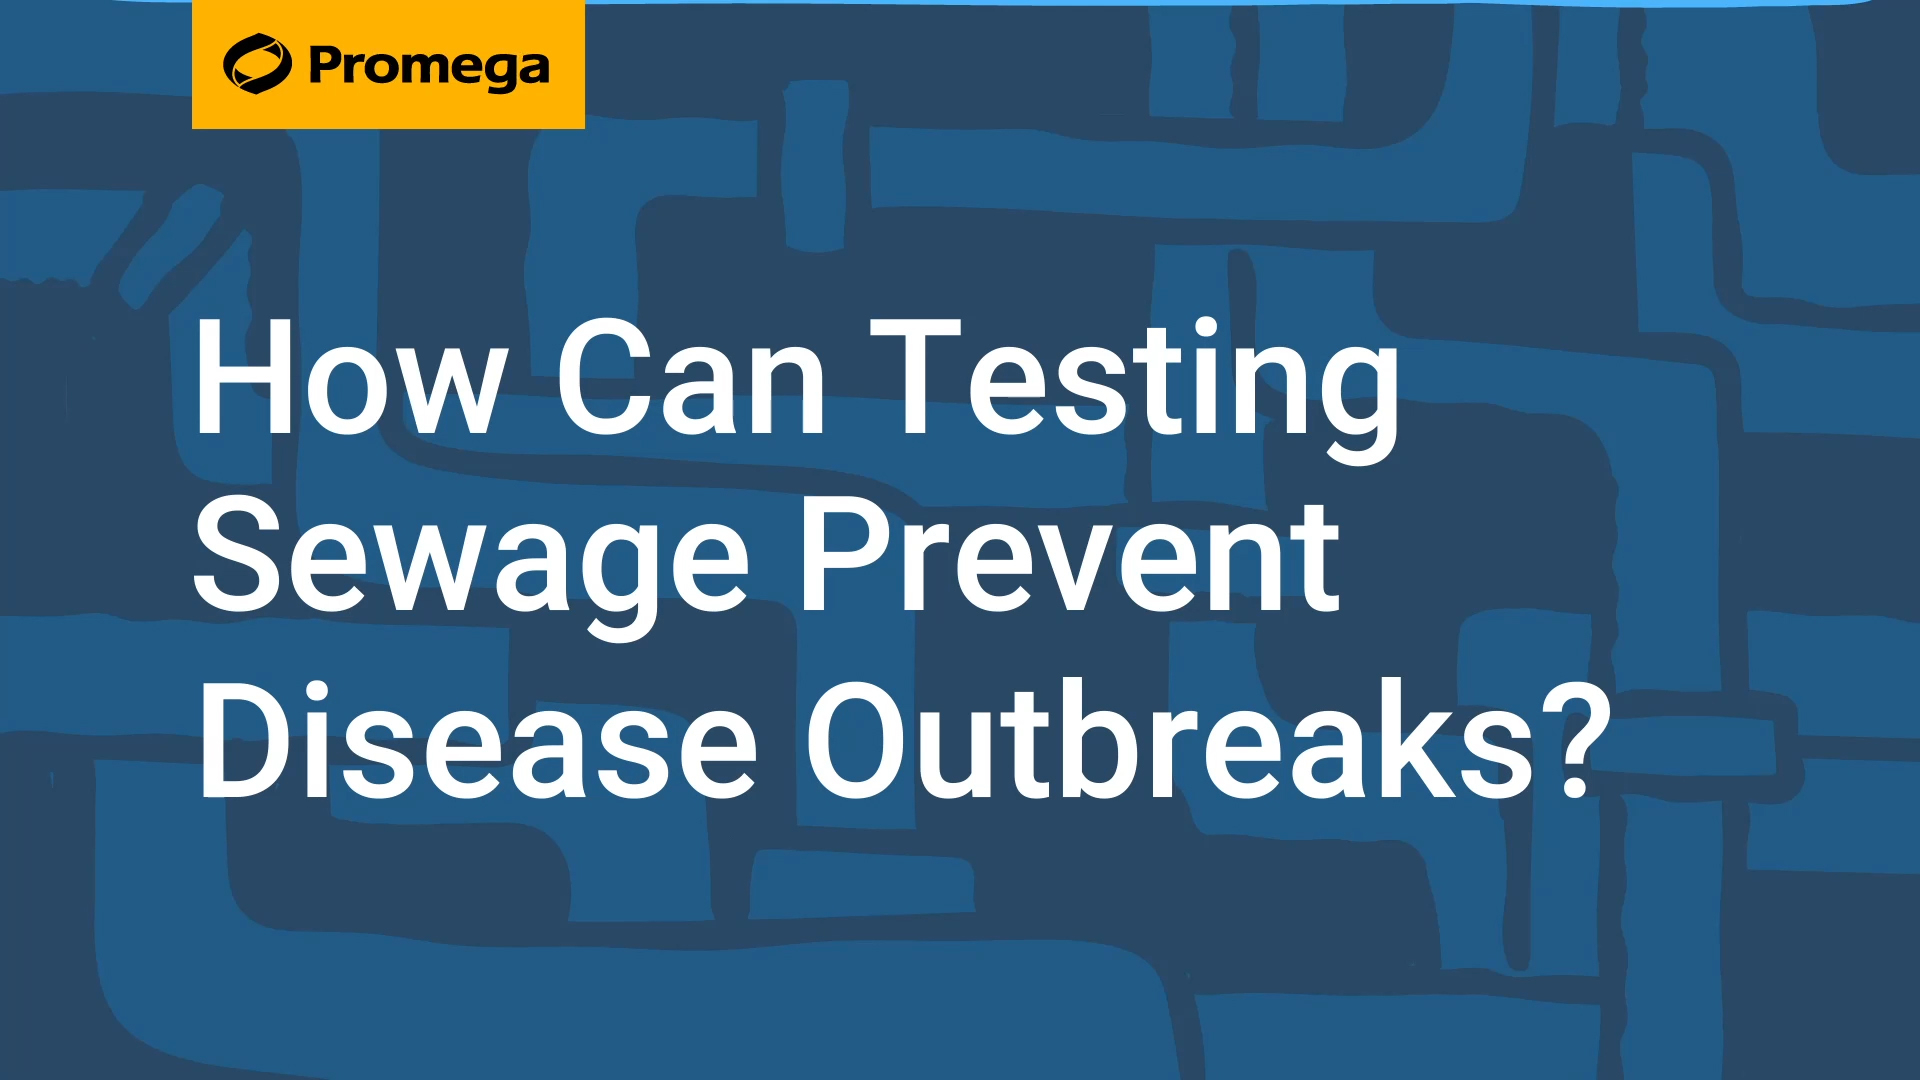 Wastewater testing is a critical public health tool for predicting infectious disease outbreaks. The practice gained popularity during the COVID-19 pandemic and many surveillance programs have expanded to include diseases including polio, monkeypox and influenza.